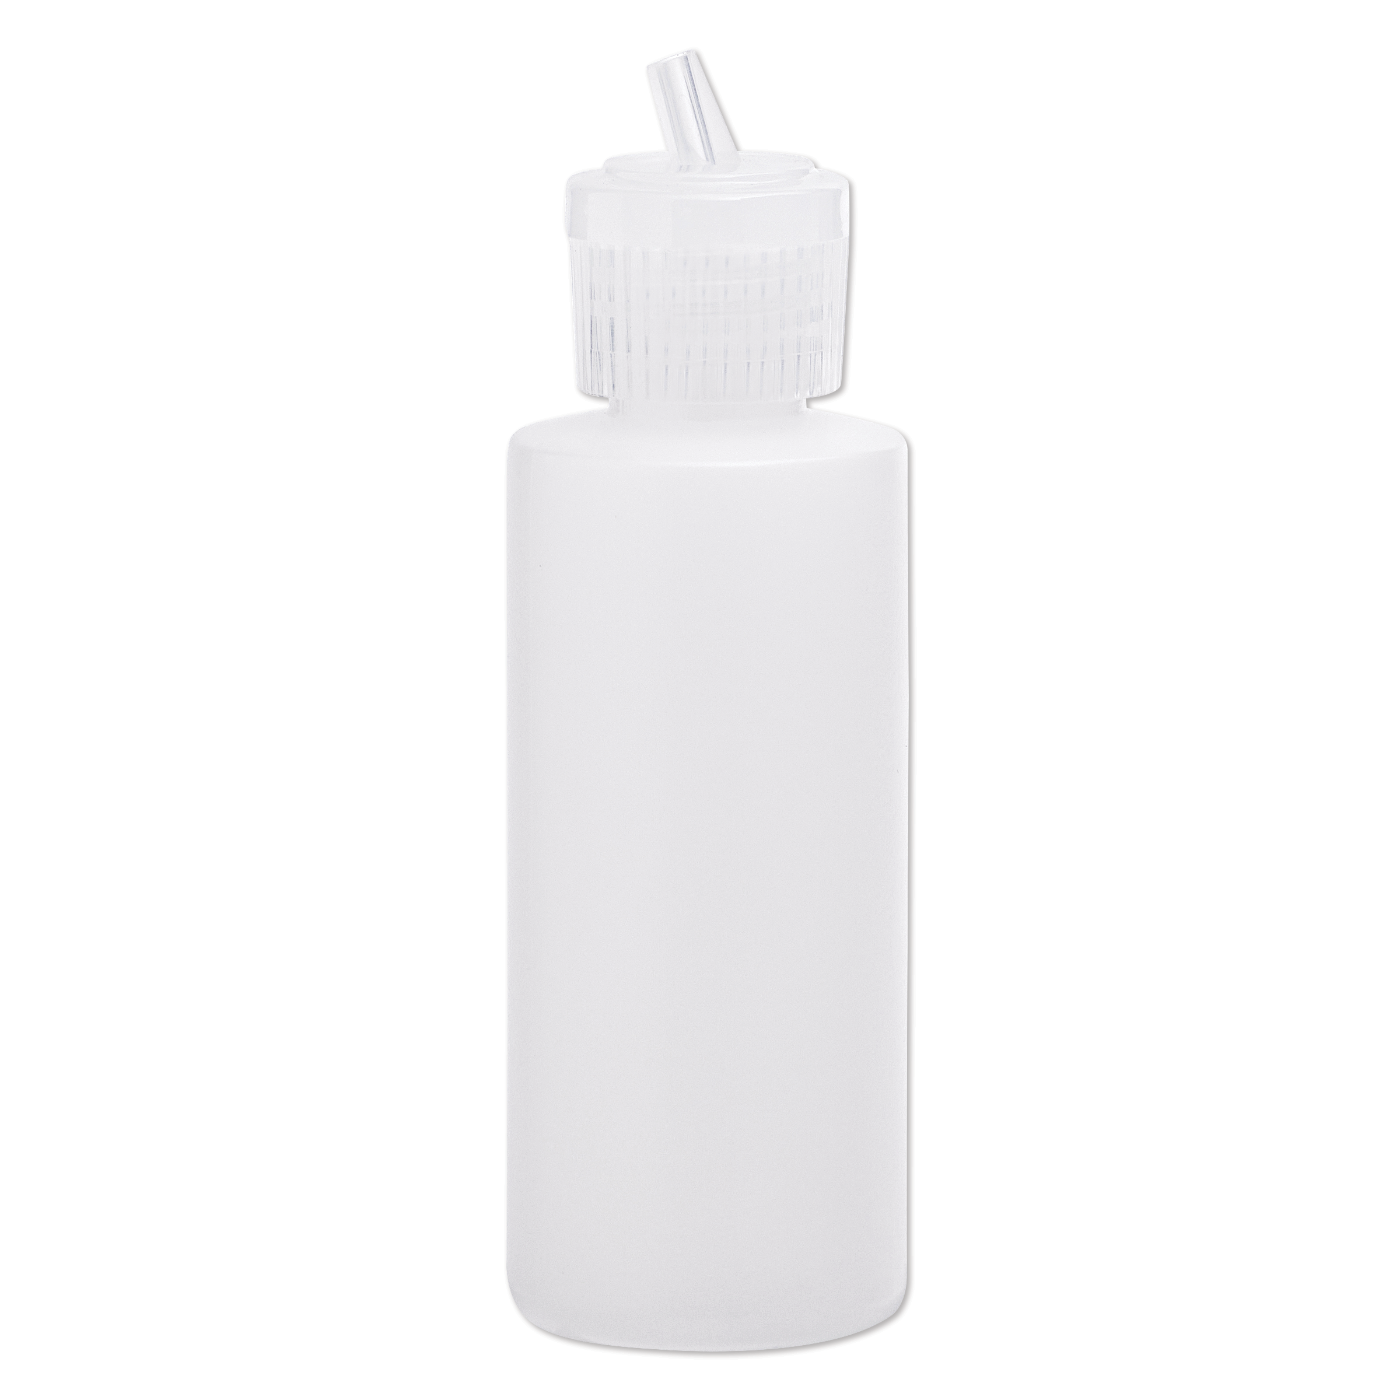 Flip-Top Bottle with Measuring Scales, 2 oz.